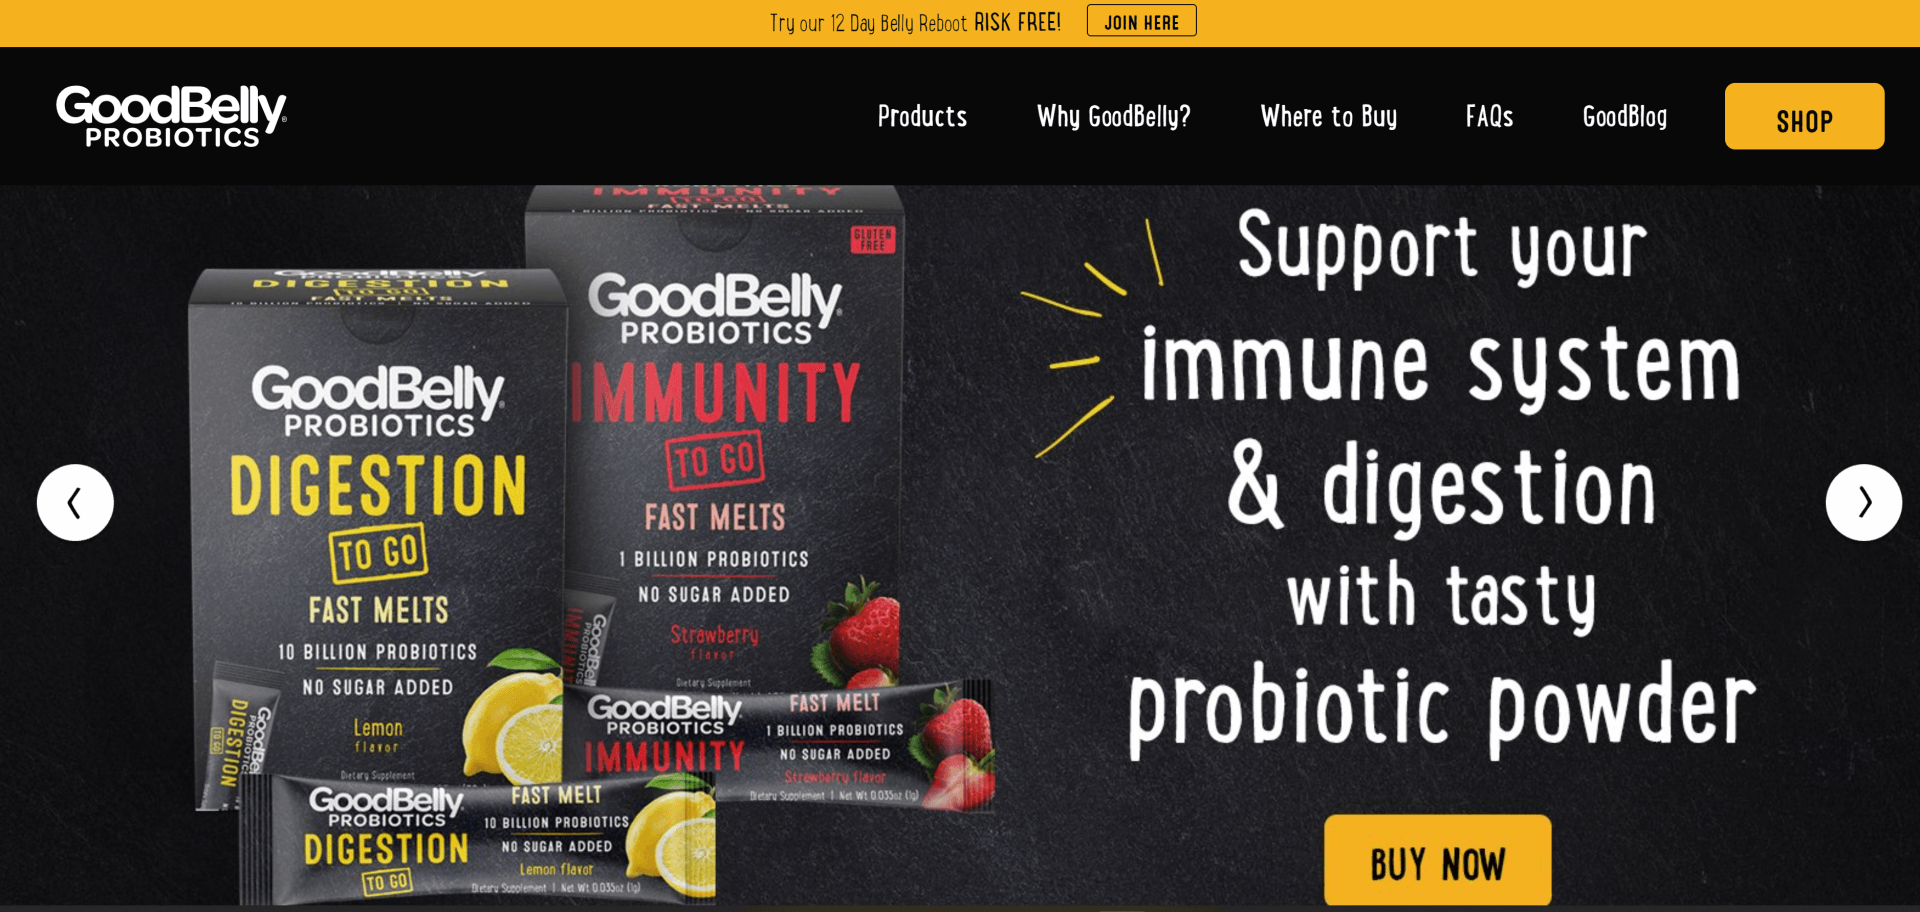 image showing GoodBelly products web page